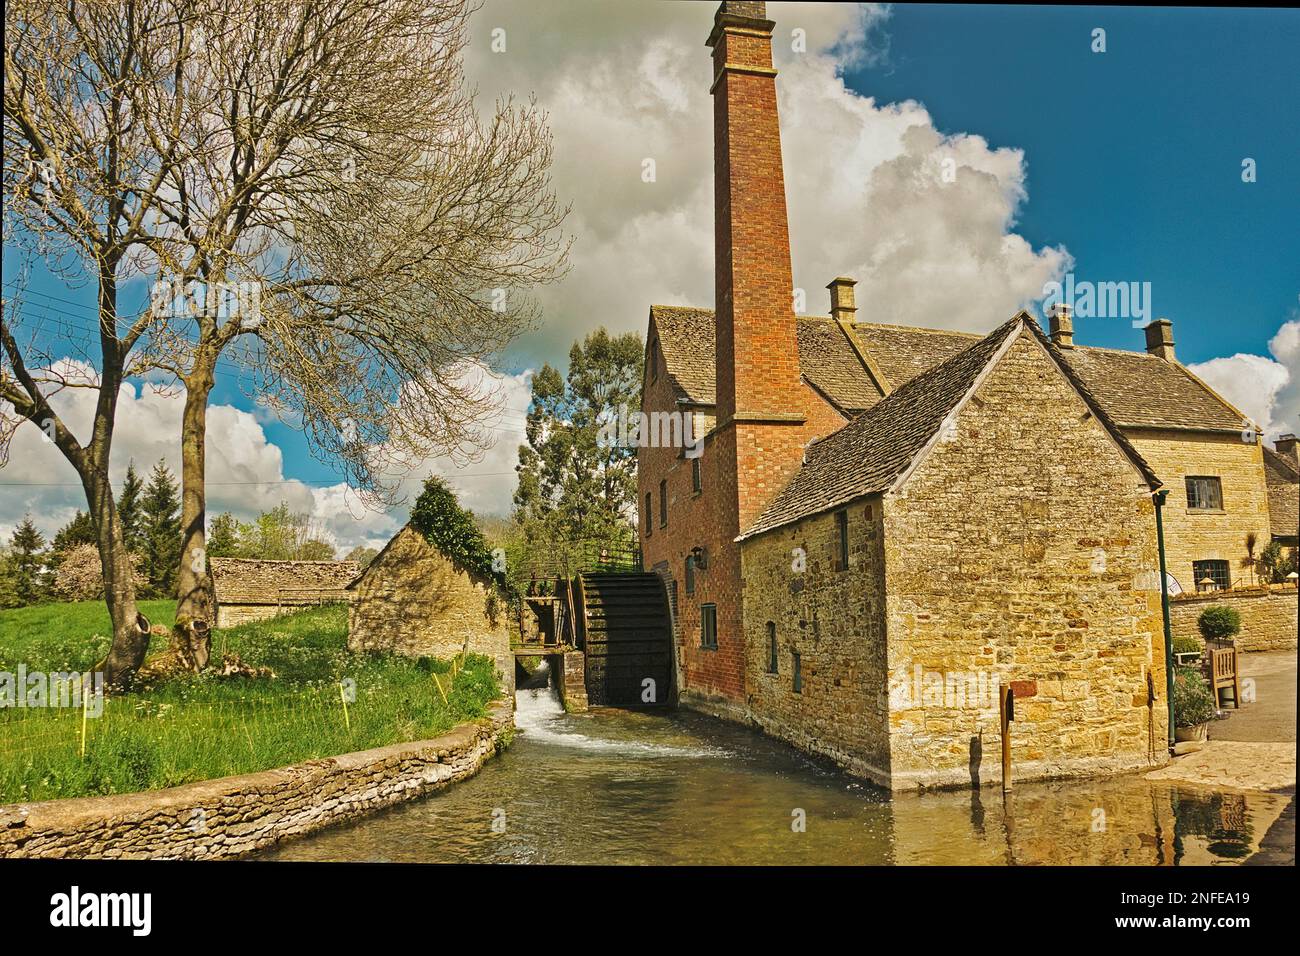 The Old Mill, Lower Slaughter, Gloucestershire, UK Stock Photo